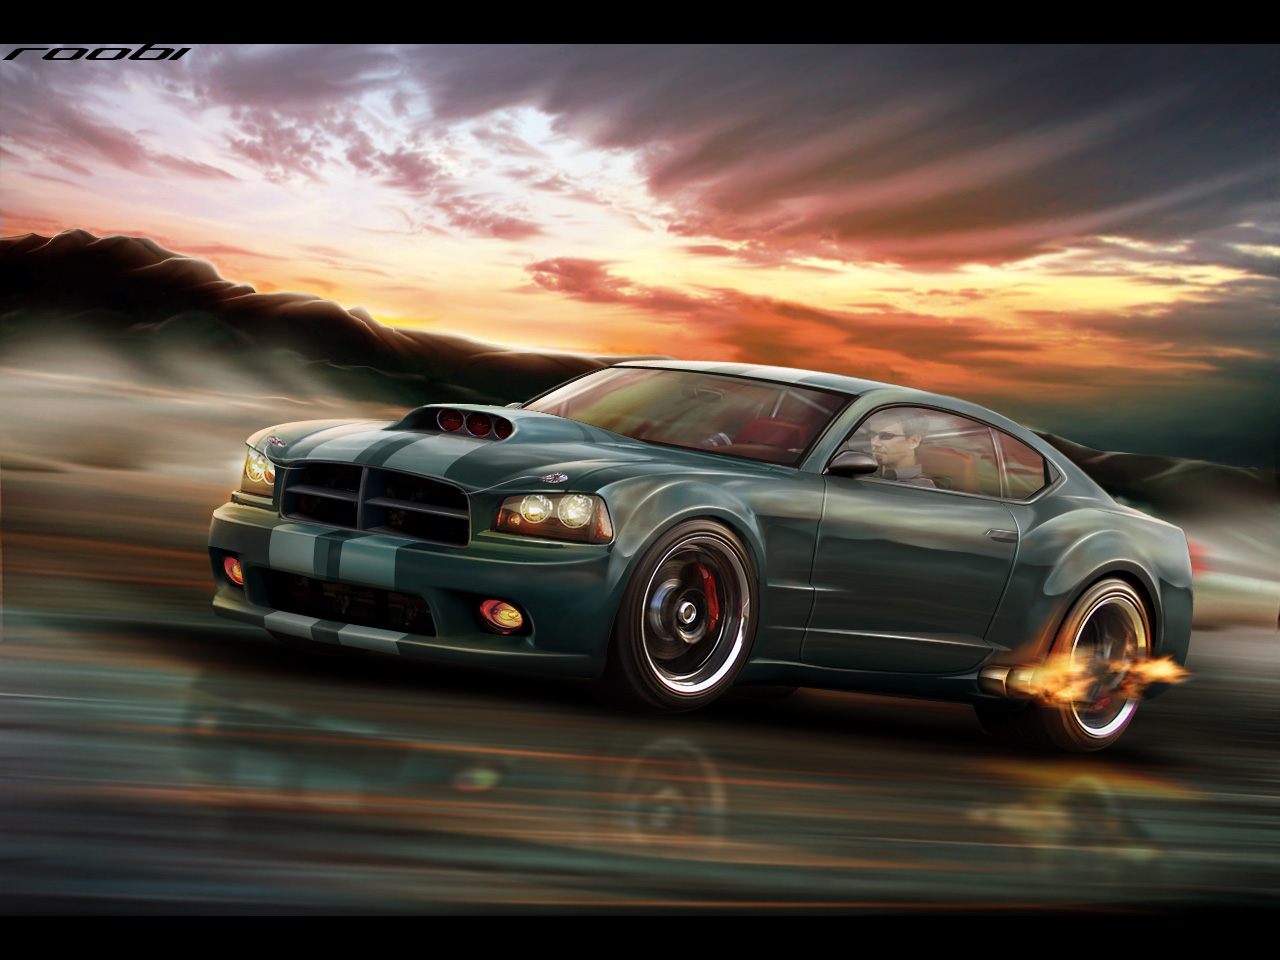 Dodge Hd Wallpapers Charger - Dodge Charger Srt8 Body Kit - HD Wallpaper 